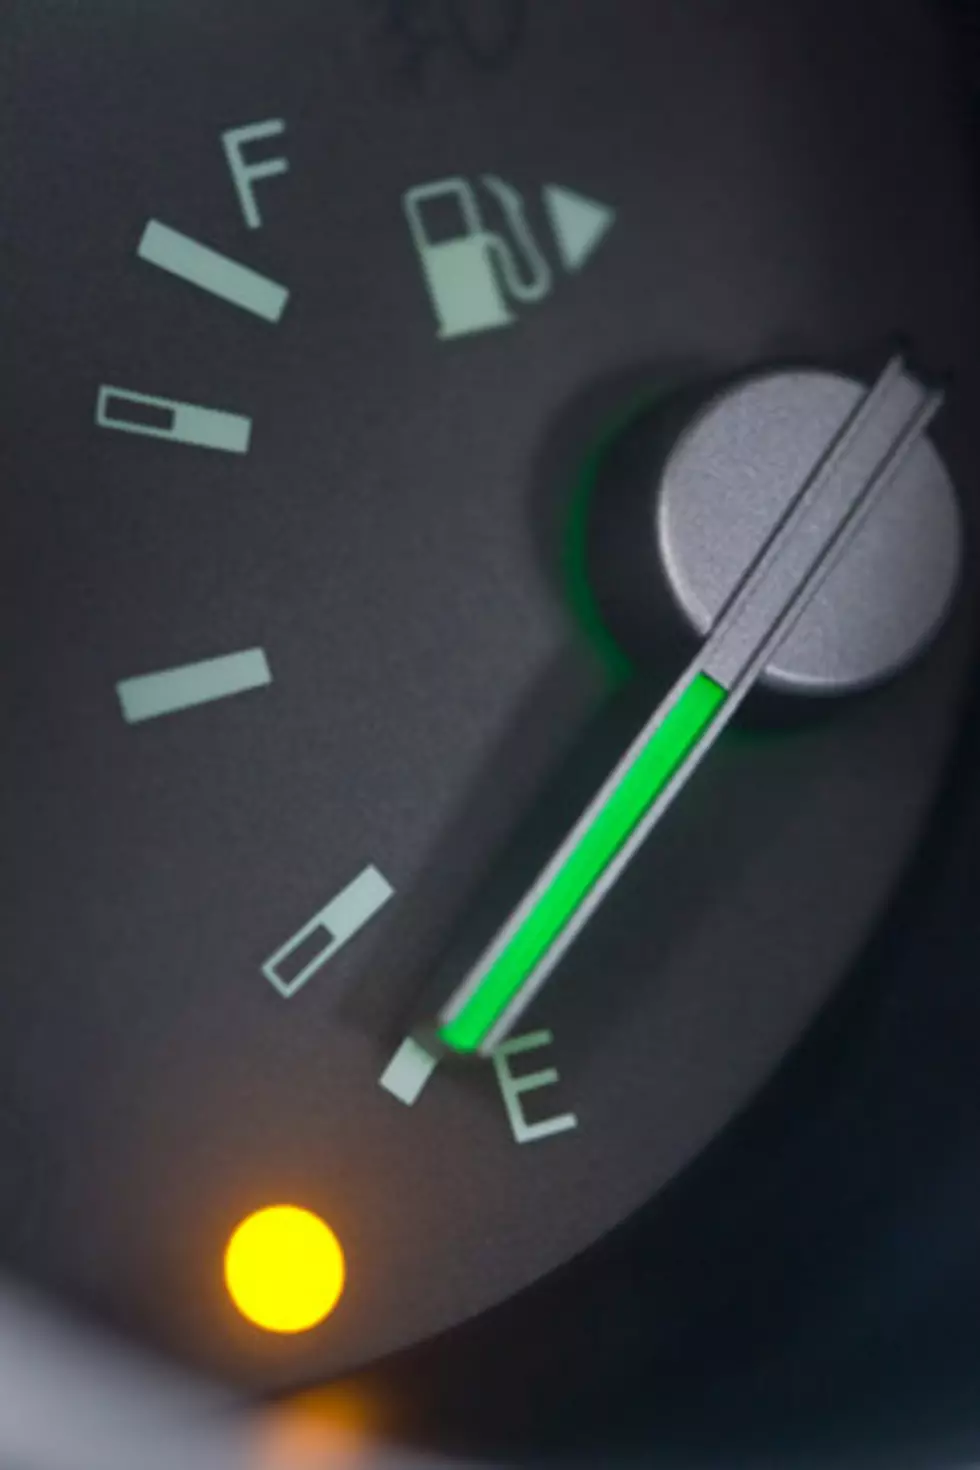 How Far Can You Drive With The Low Fuel Light On?